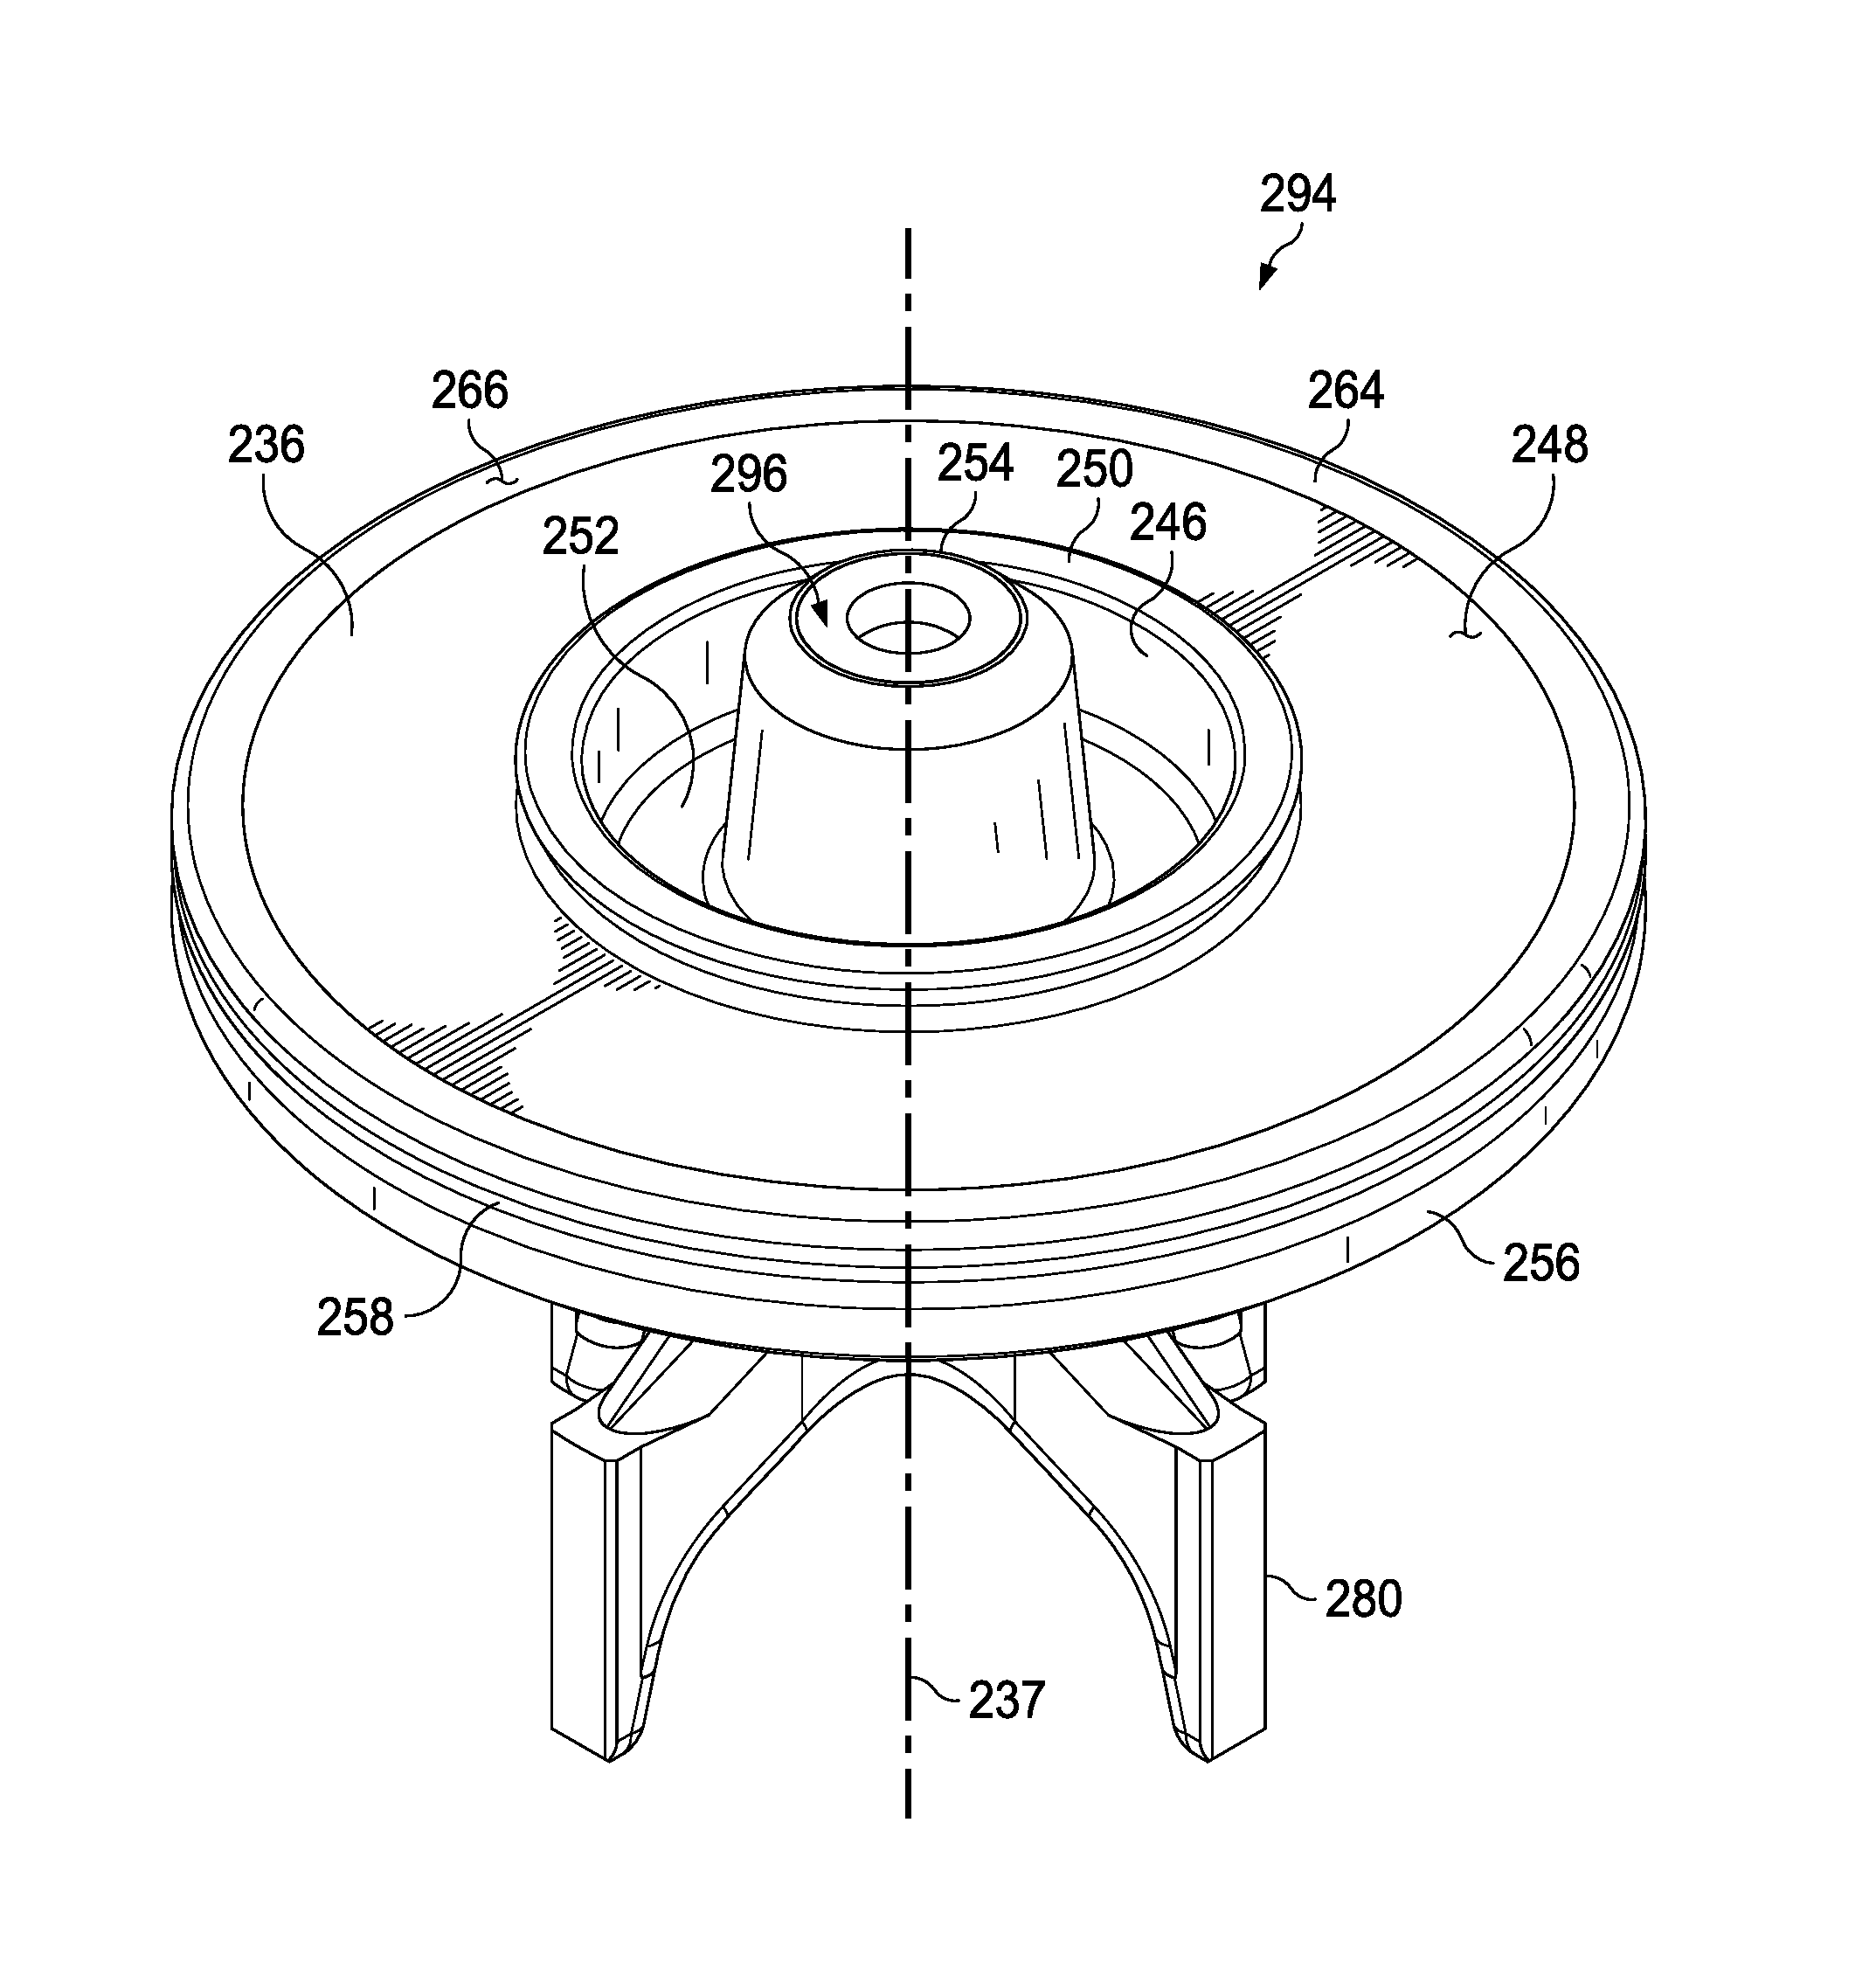 Valve for Reciprocating Pump Assembly